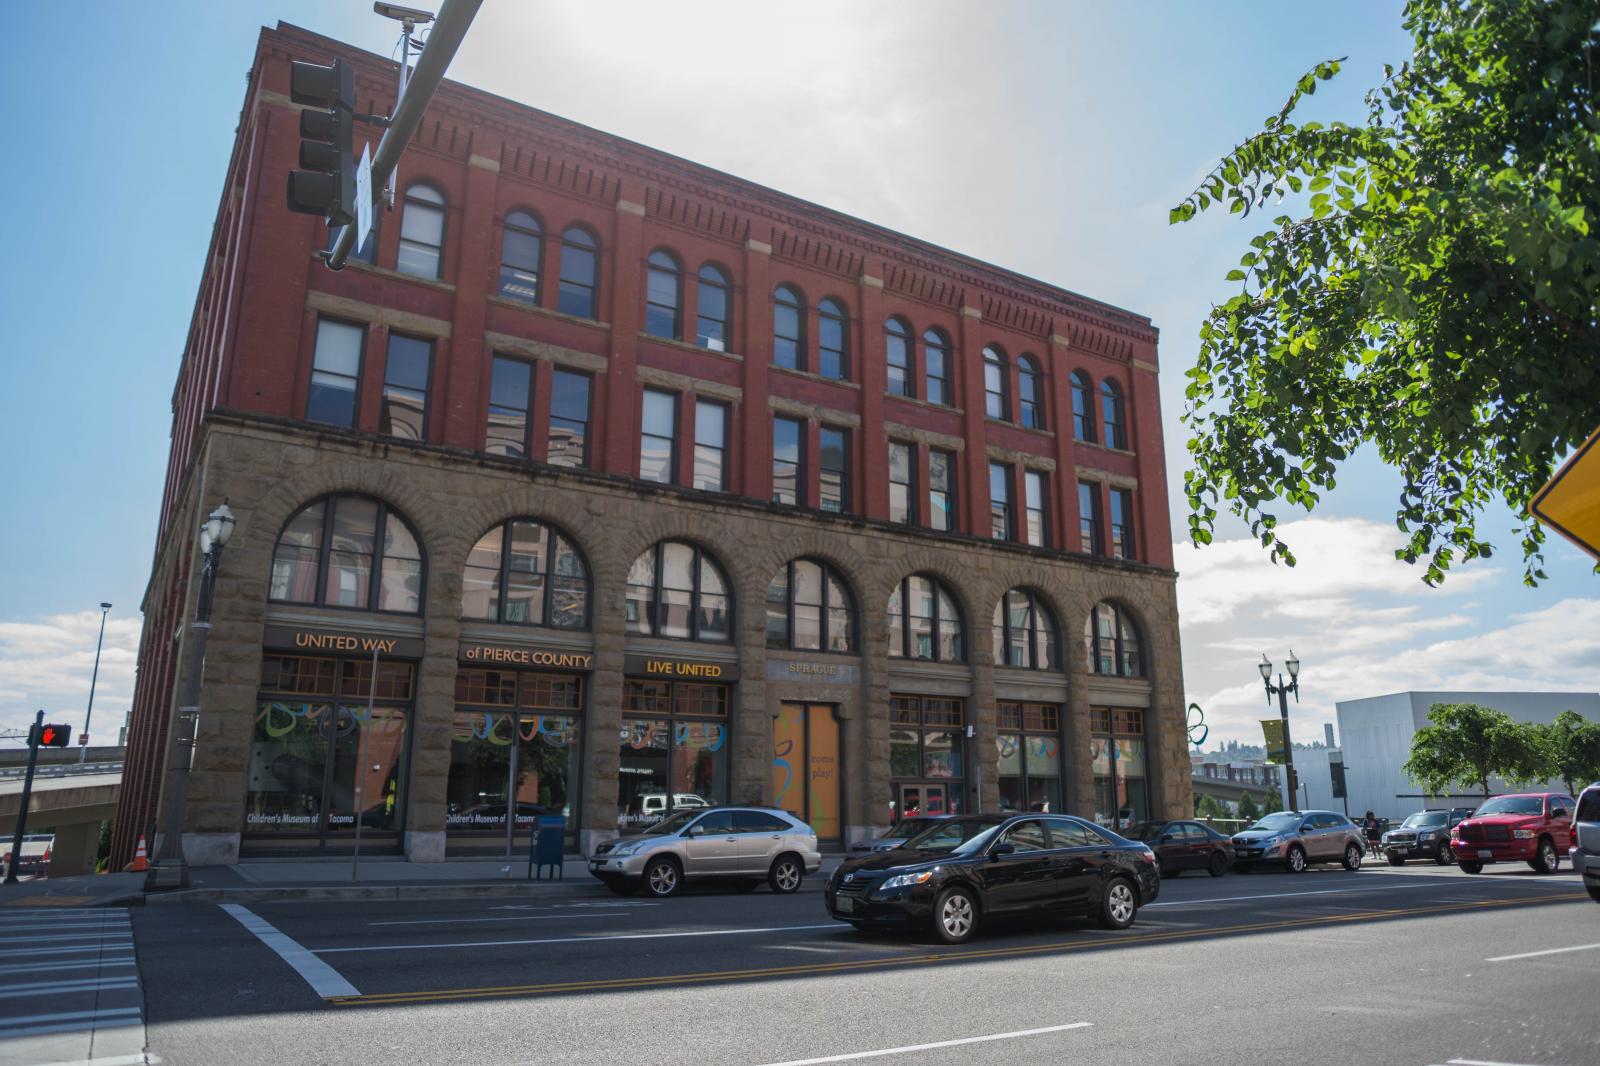 Sprague Building, a four story historic warehouse now housing the Tacoma Children